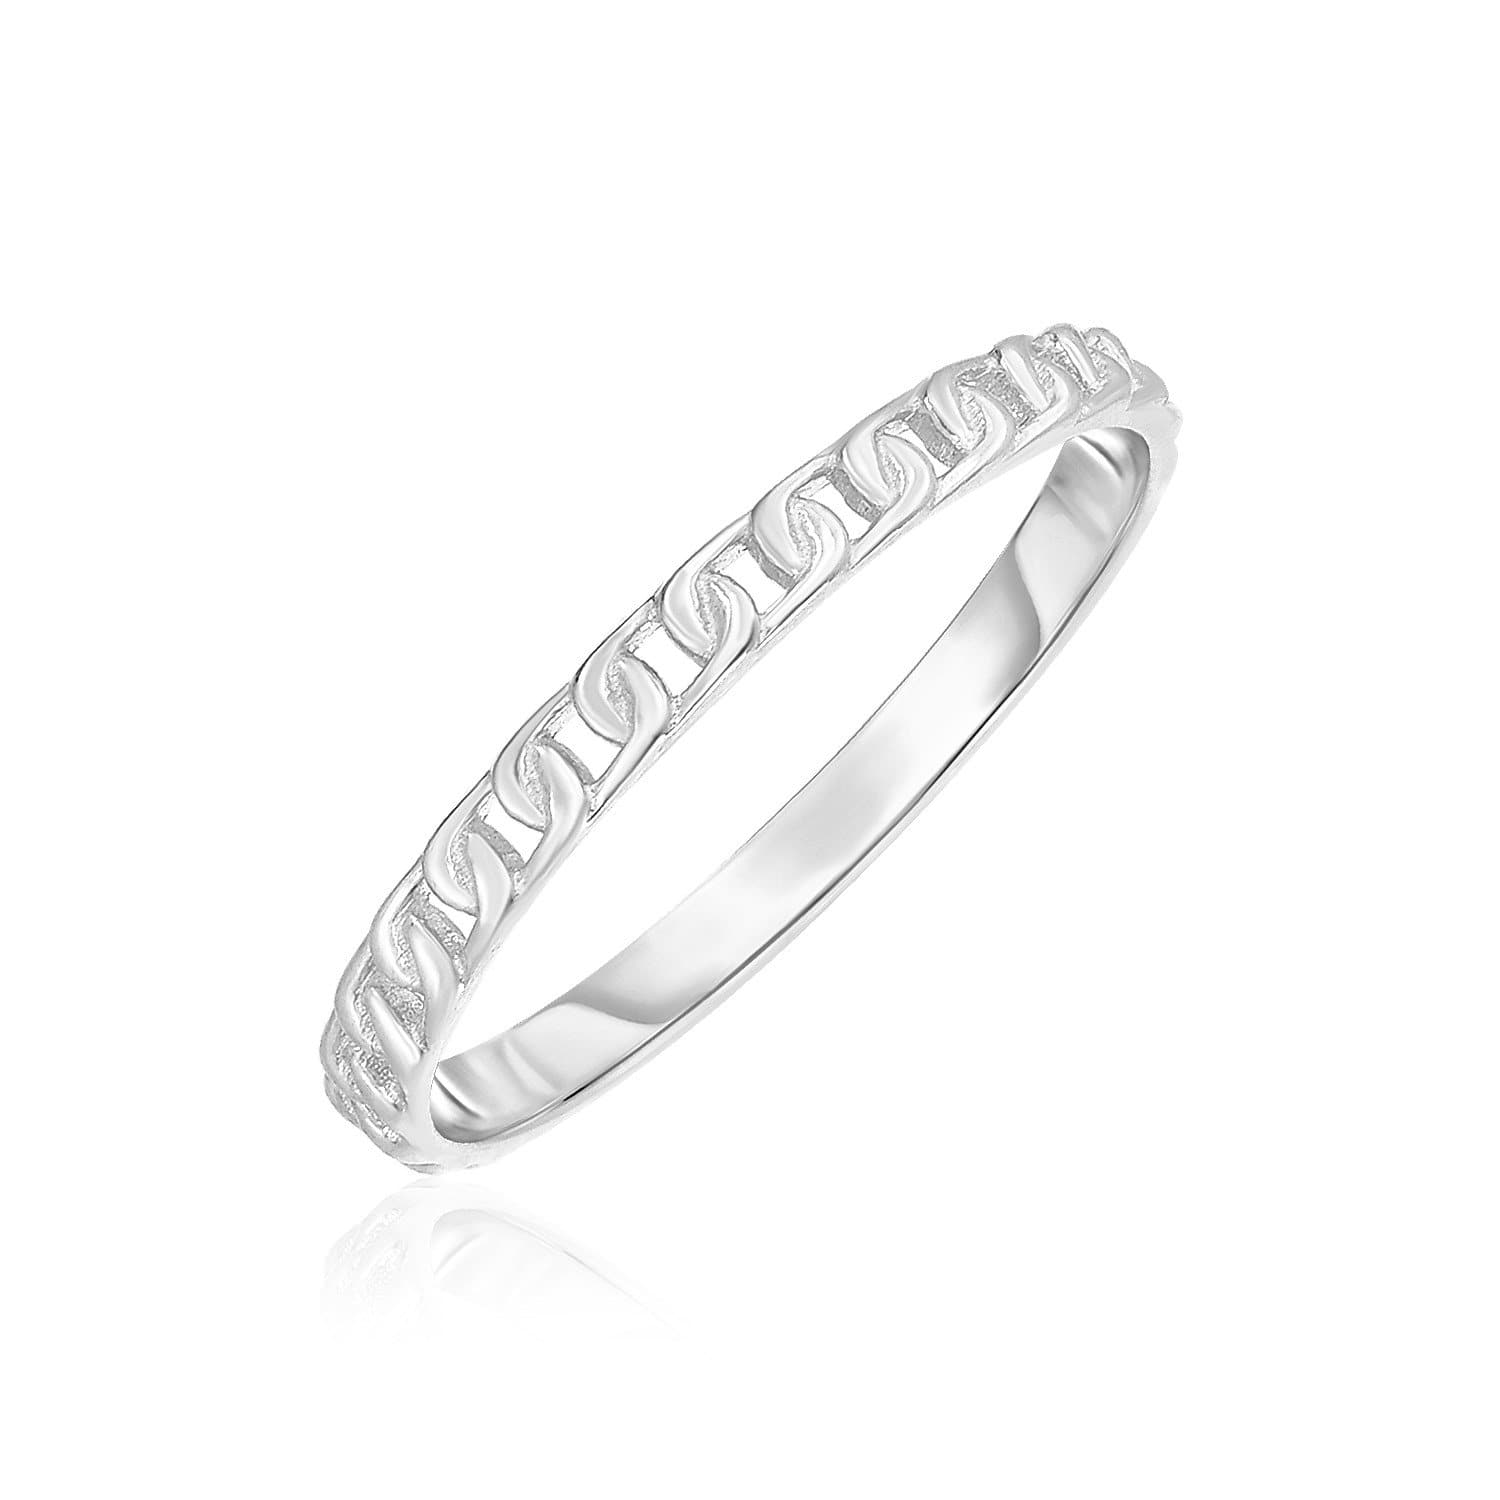 14k White Gold Ring with Bead Texture